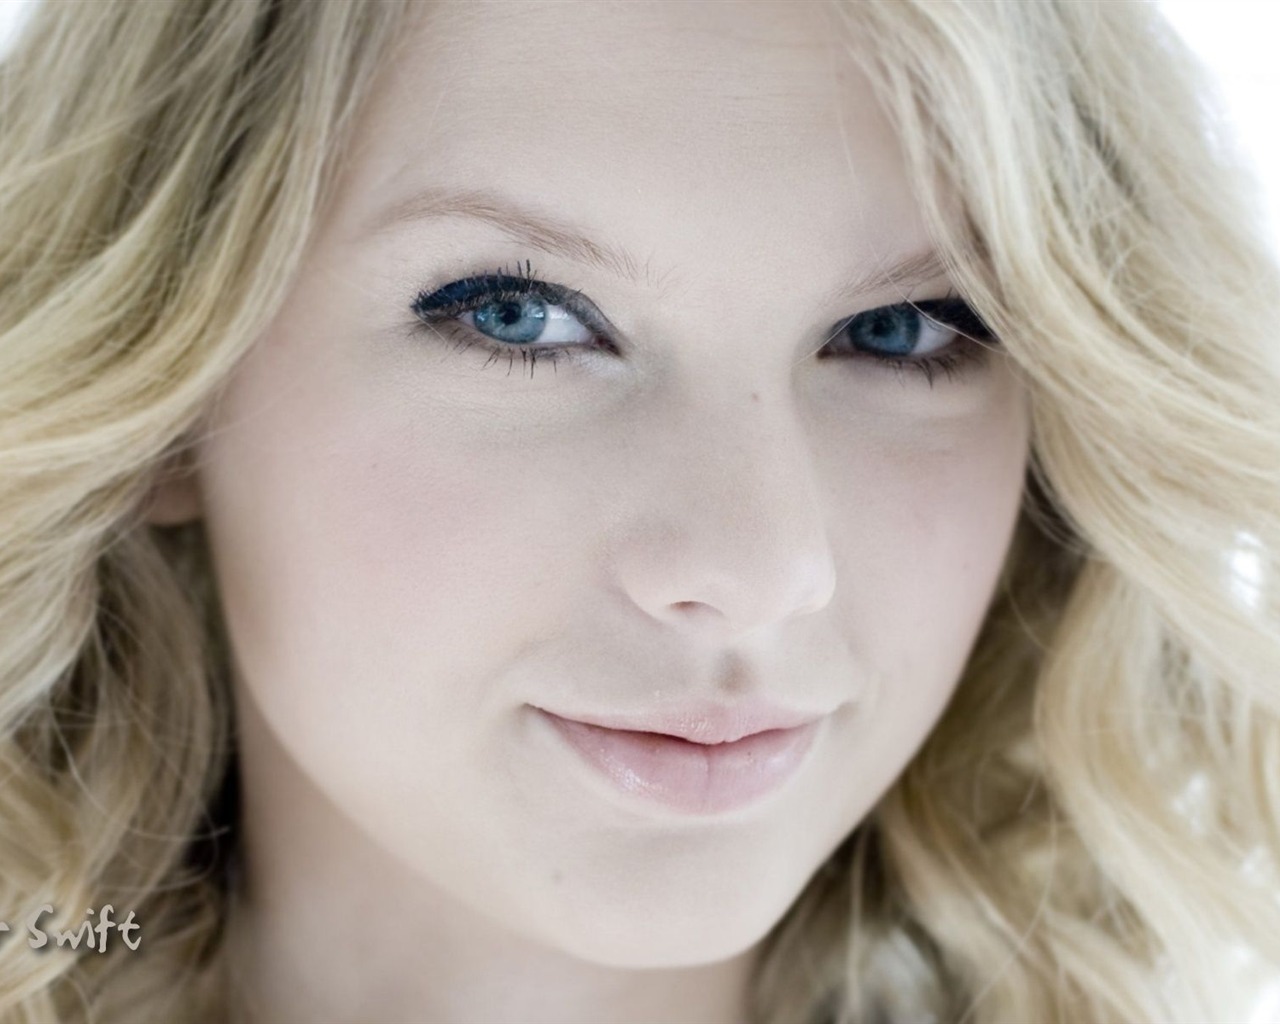 Taylor Swift #076 - 1280x1024 Wallpapers Pictures Photos Images